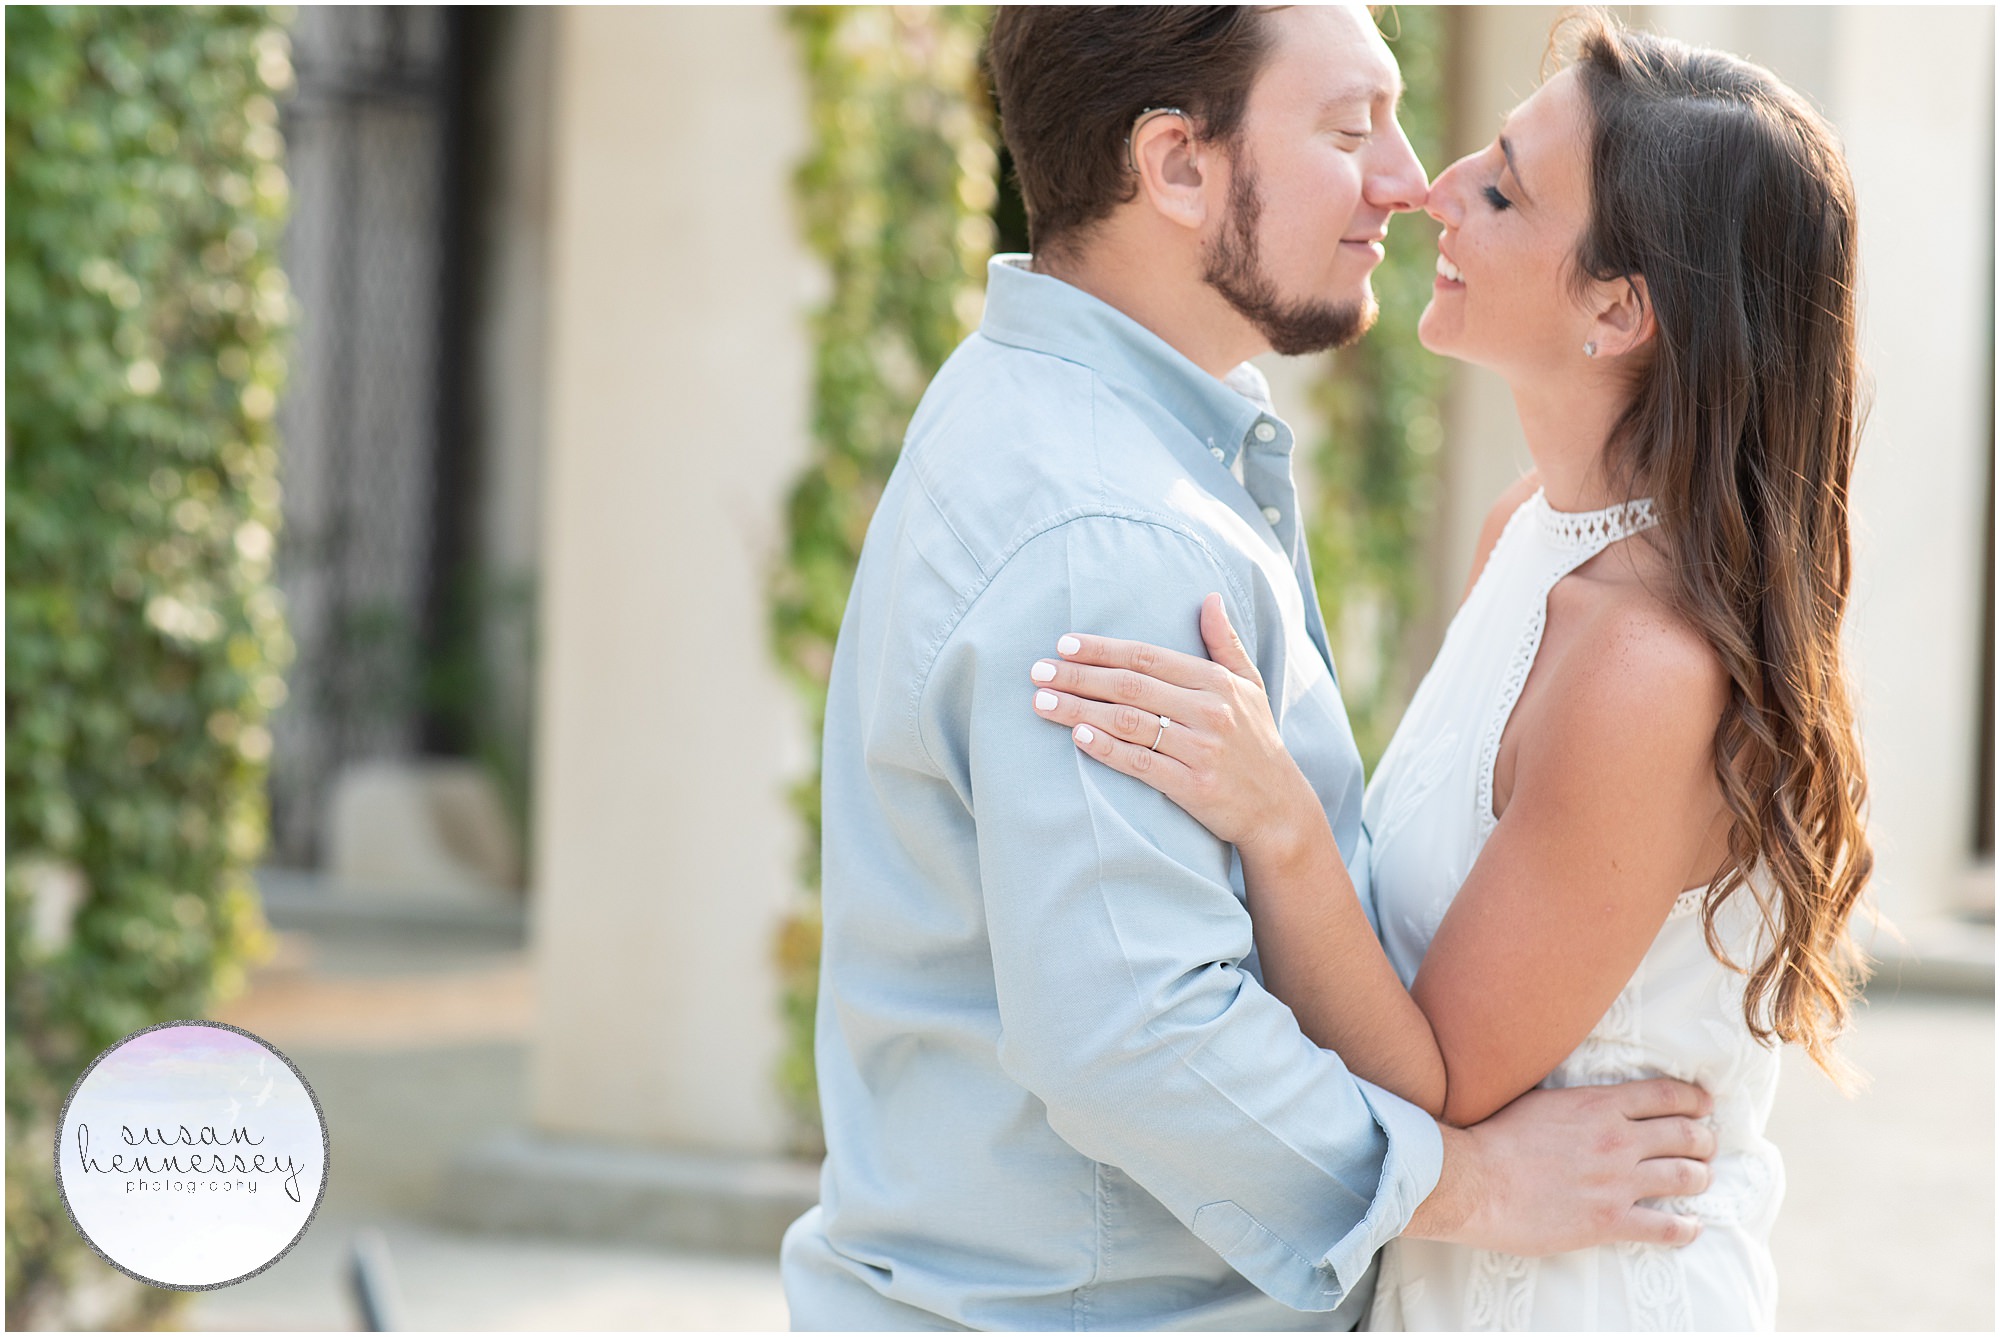 A romantic image from a couple's photography session at Longwood Gardens